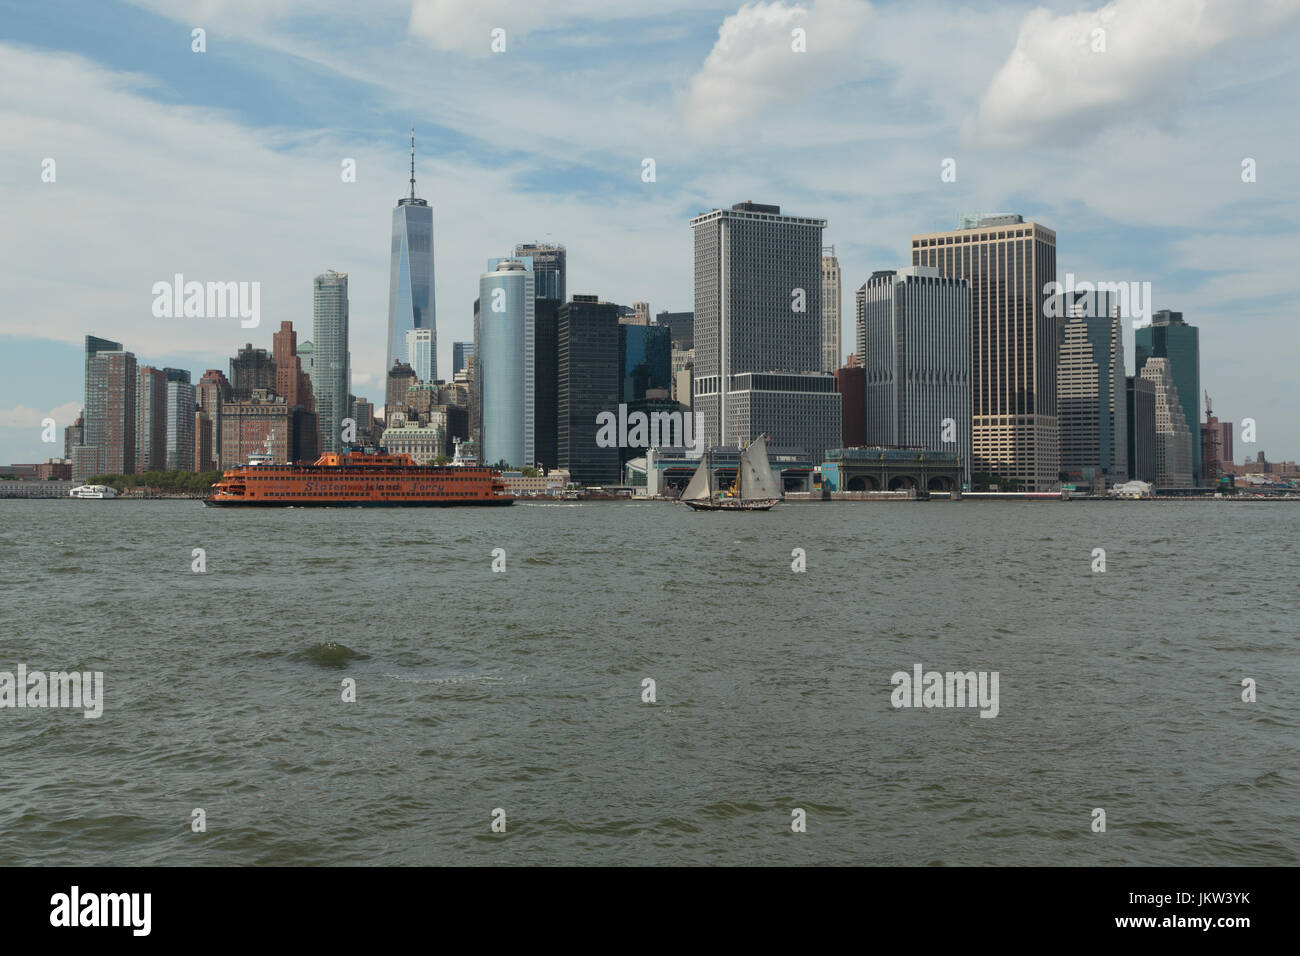 A photograph of Manhattan skyline, as seen from Governor's Island, New York City. The iconic orange Staten Island Ferry, and an old sailing ship can b Stock Photo